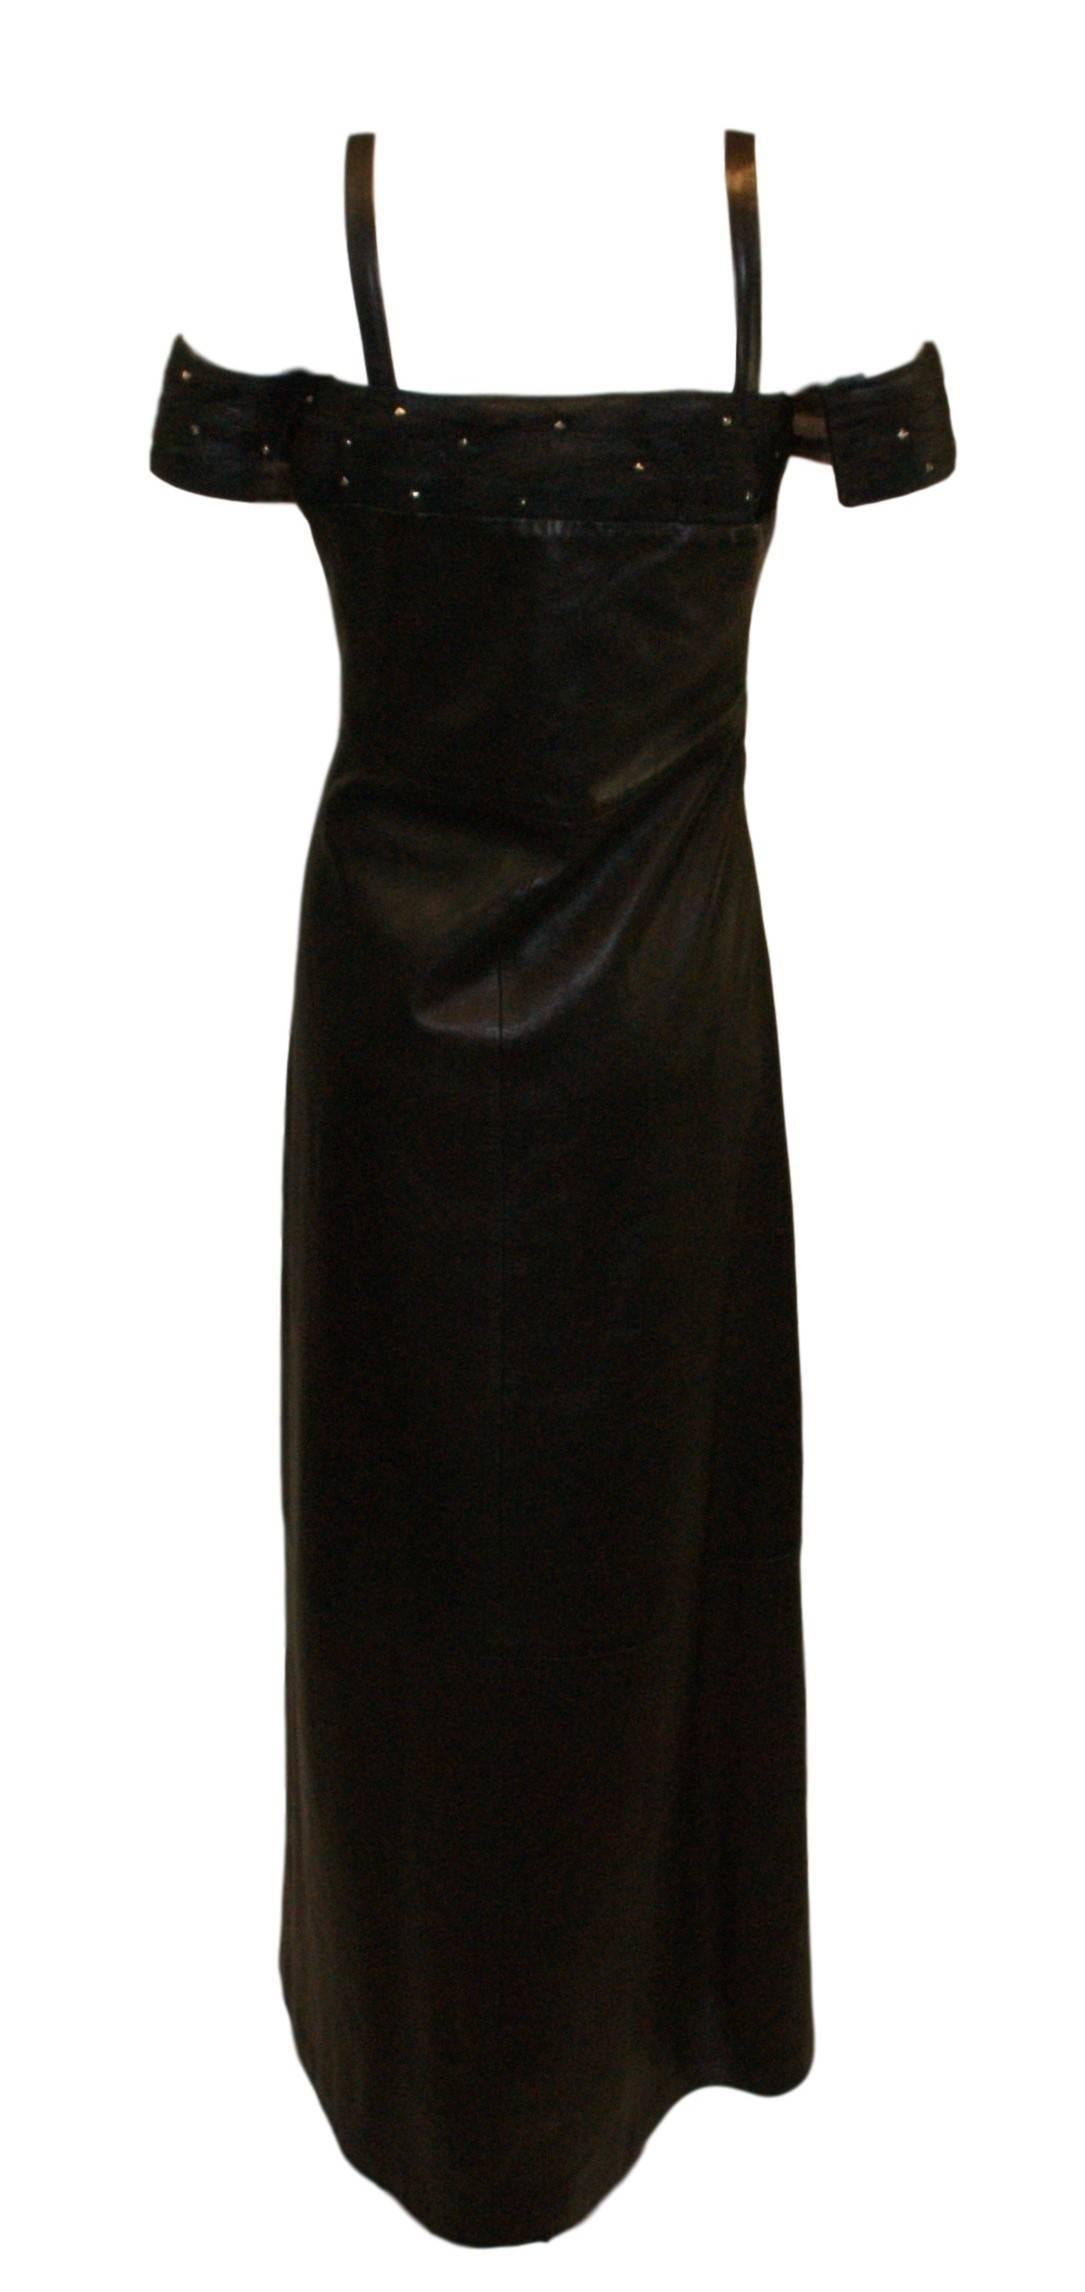 Black F/W 1998 Gianni Versace Runway Long Leather Studded Dress Gown 